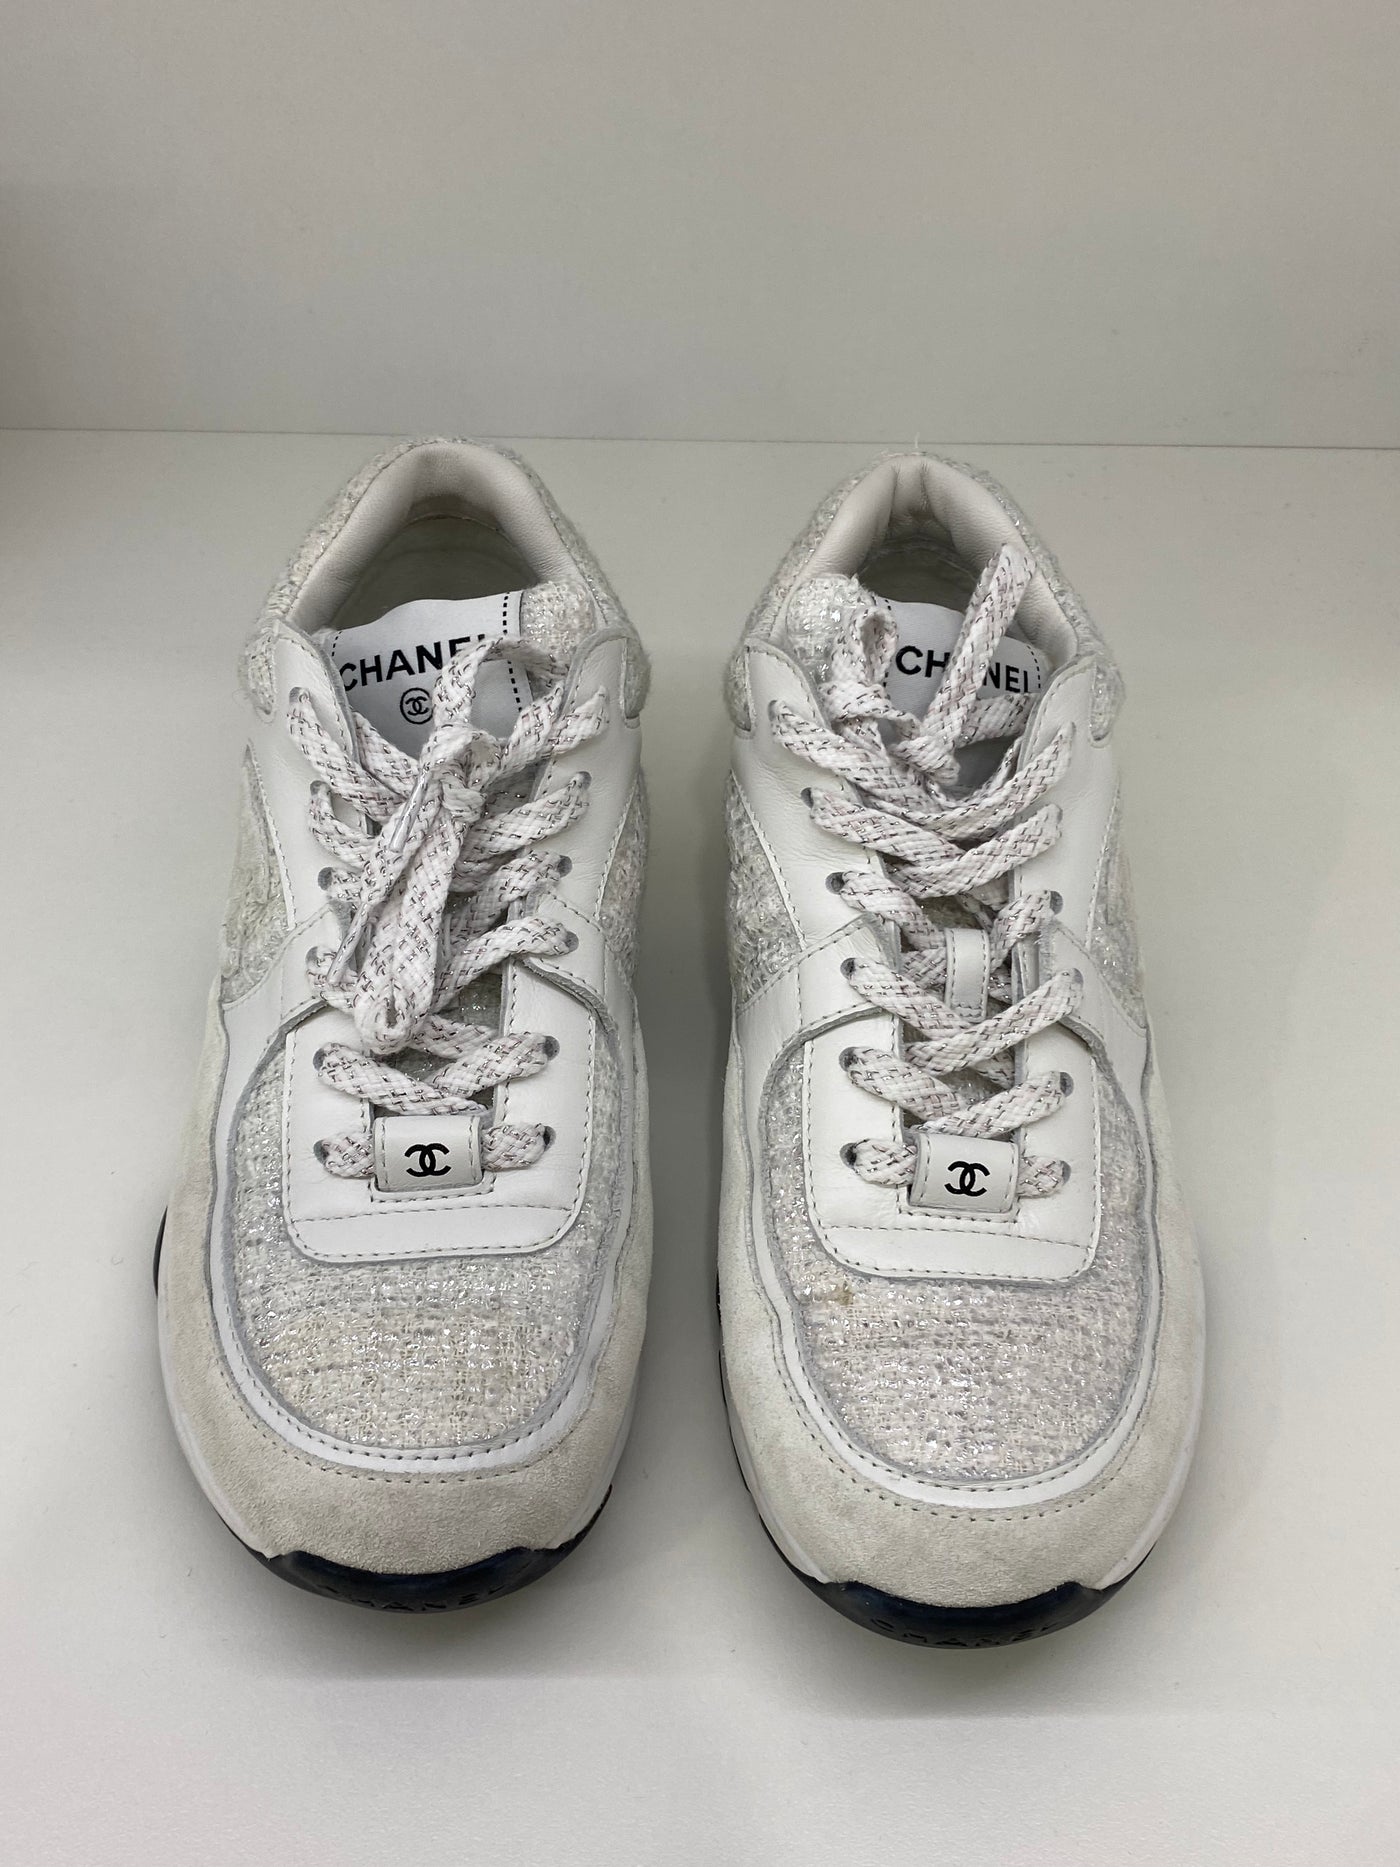 Chanel Tweed Sneakers - size 37.5